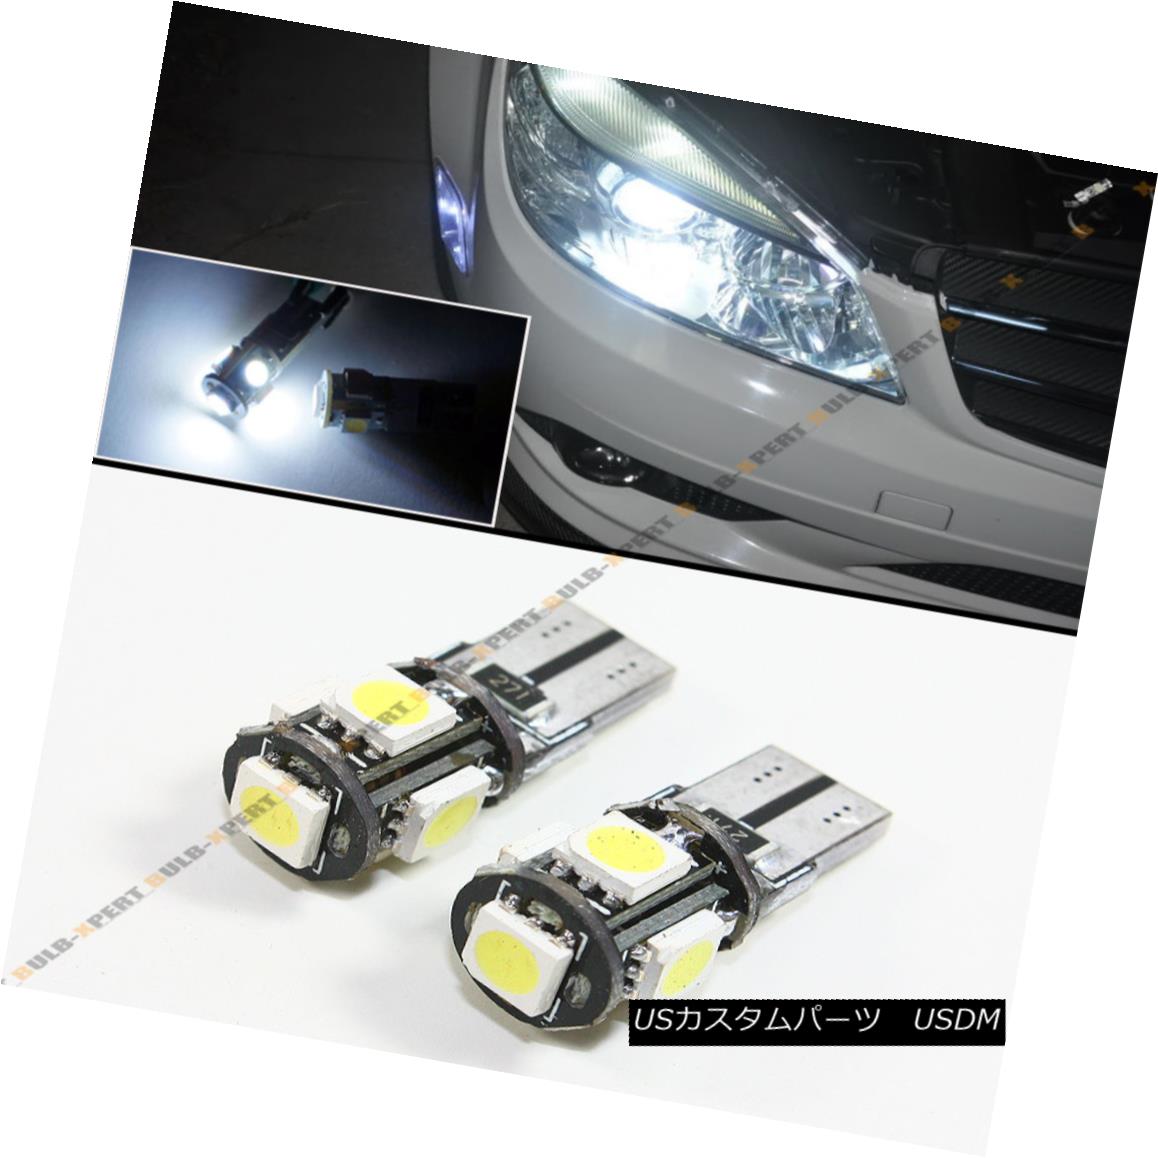 ѡ PAIR EURO 6K PURE WHITE 5 SMD LED CANBUS ERROR FREE T10 194 168 W5W LIGHT BULB ڥ桼6Kԥ奢ۥ磻5 SMD LED CANBUS顼ե꡼T10 194 168 W5W LIGHT BULB